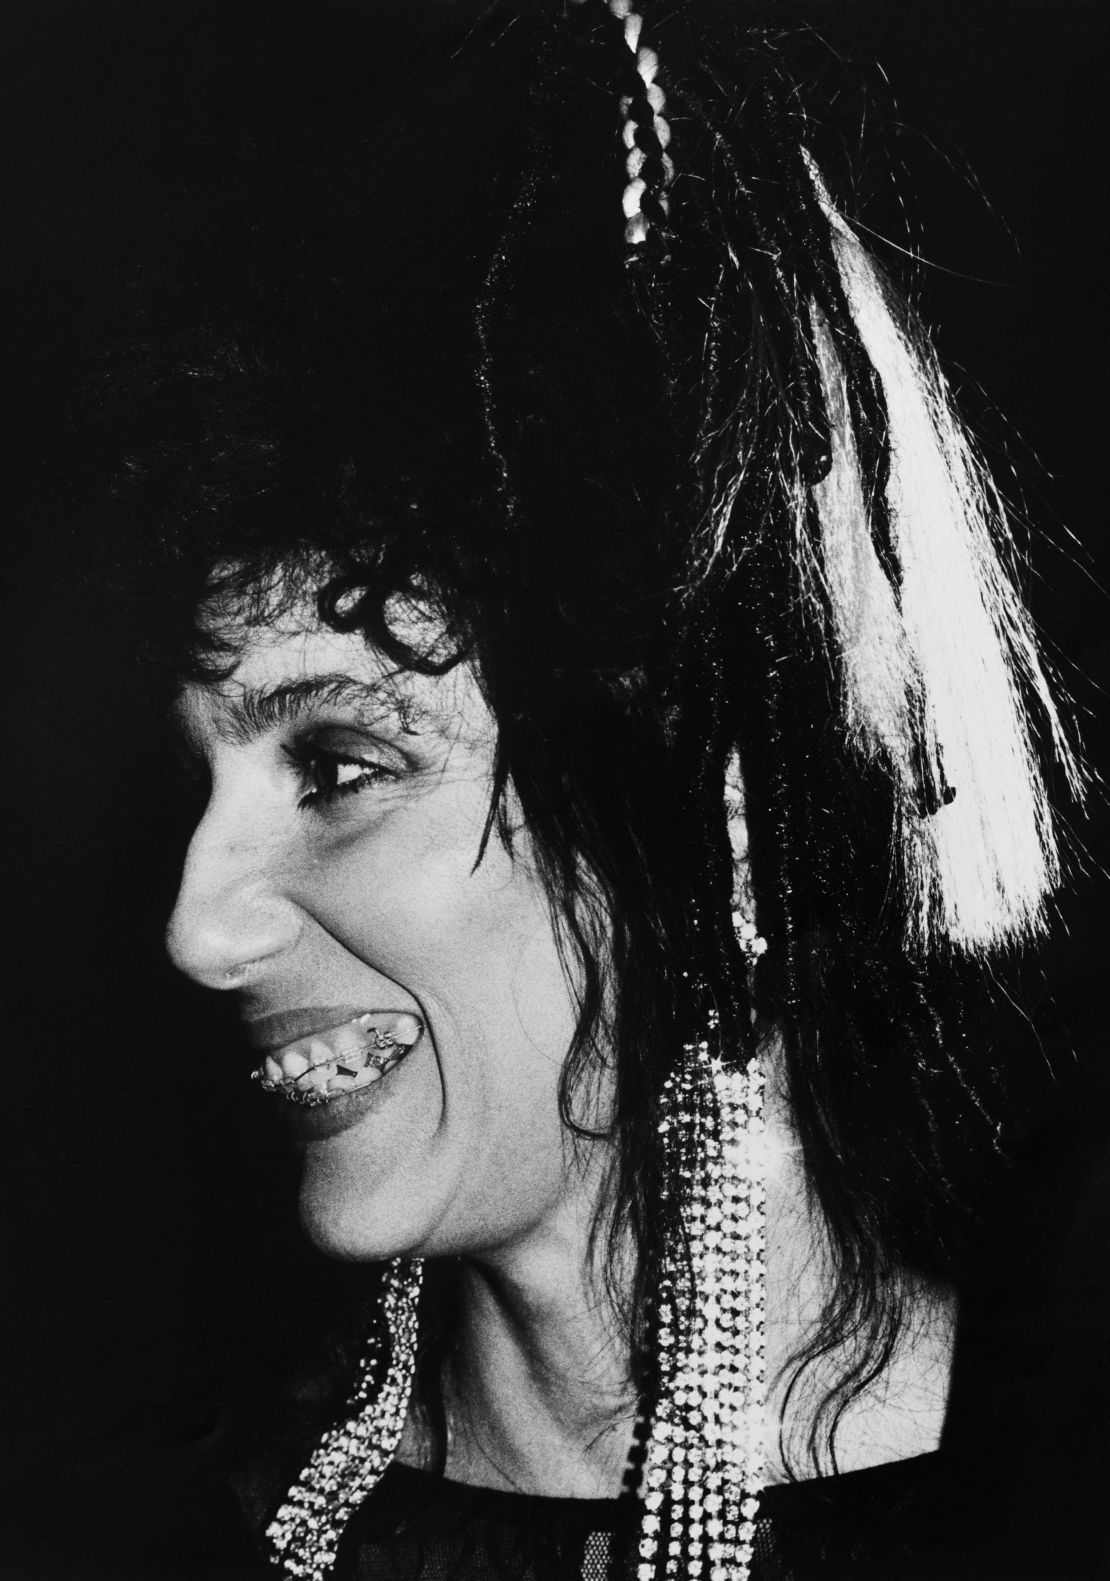 Cher attends the BAFTA Awards, London, March 25th 1984.